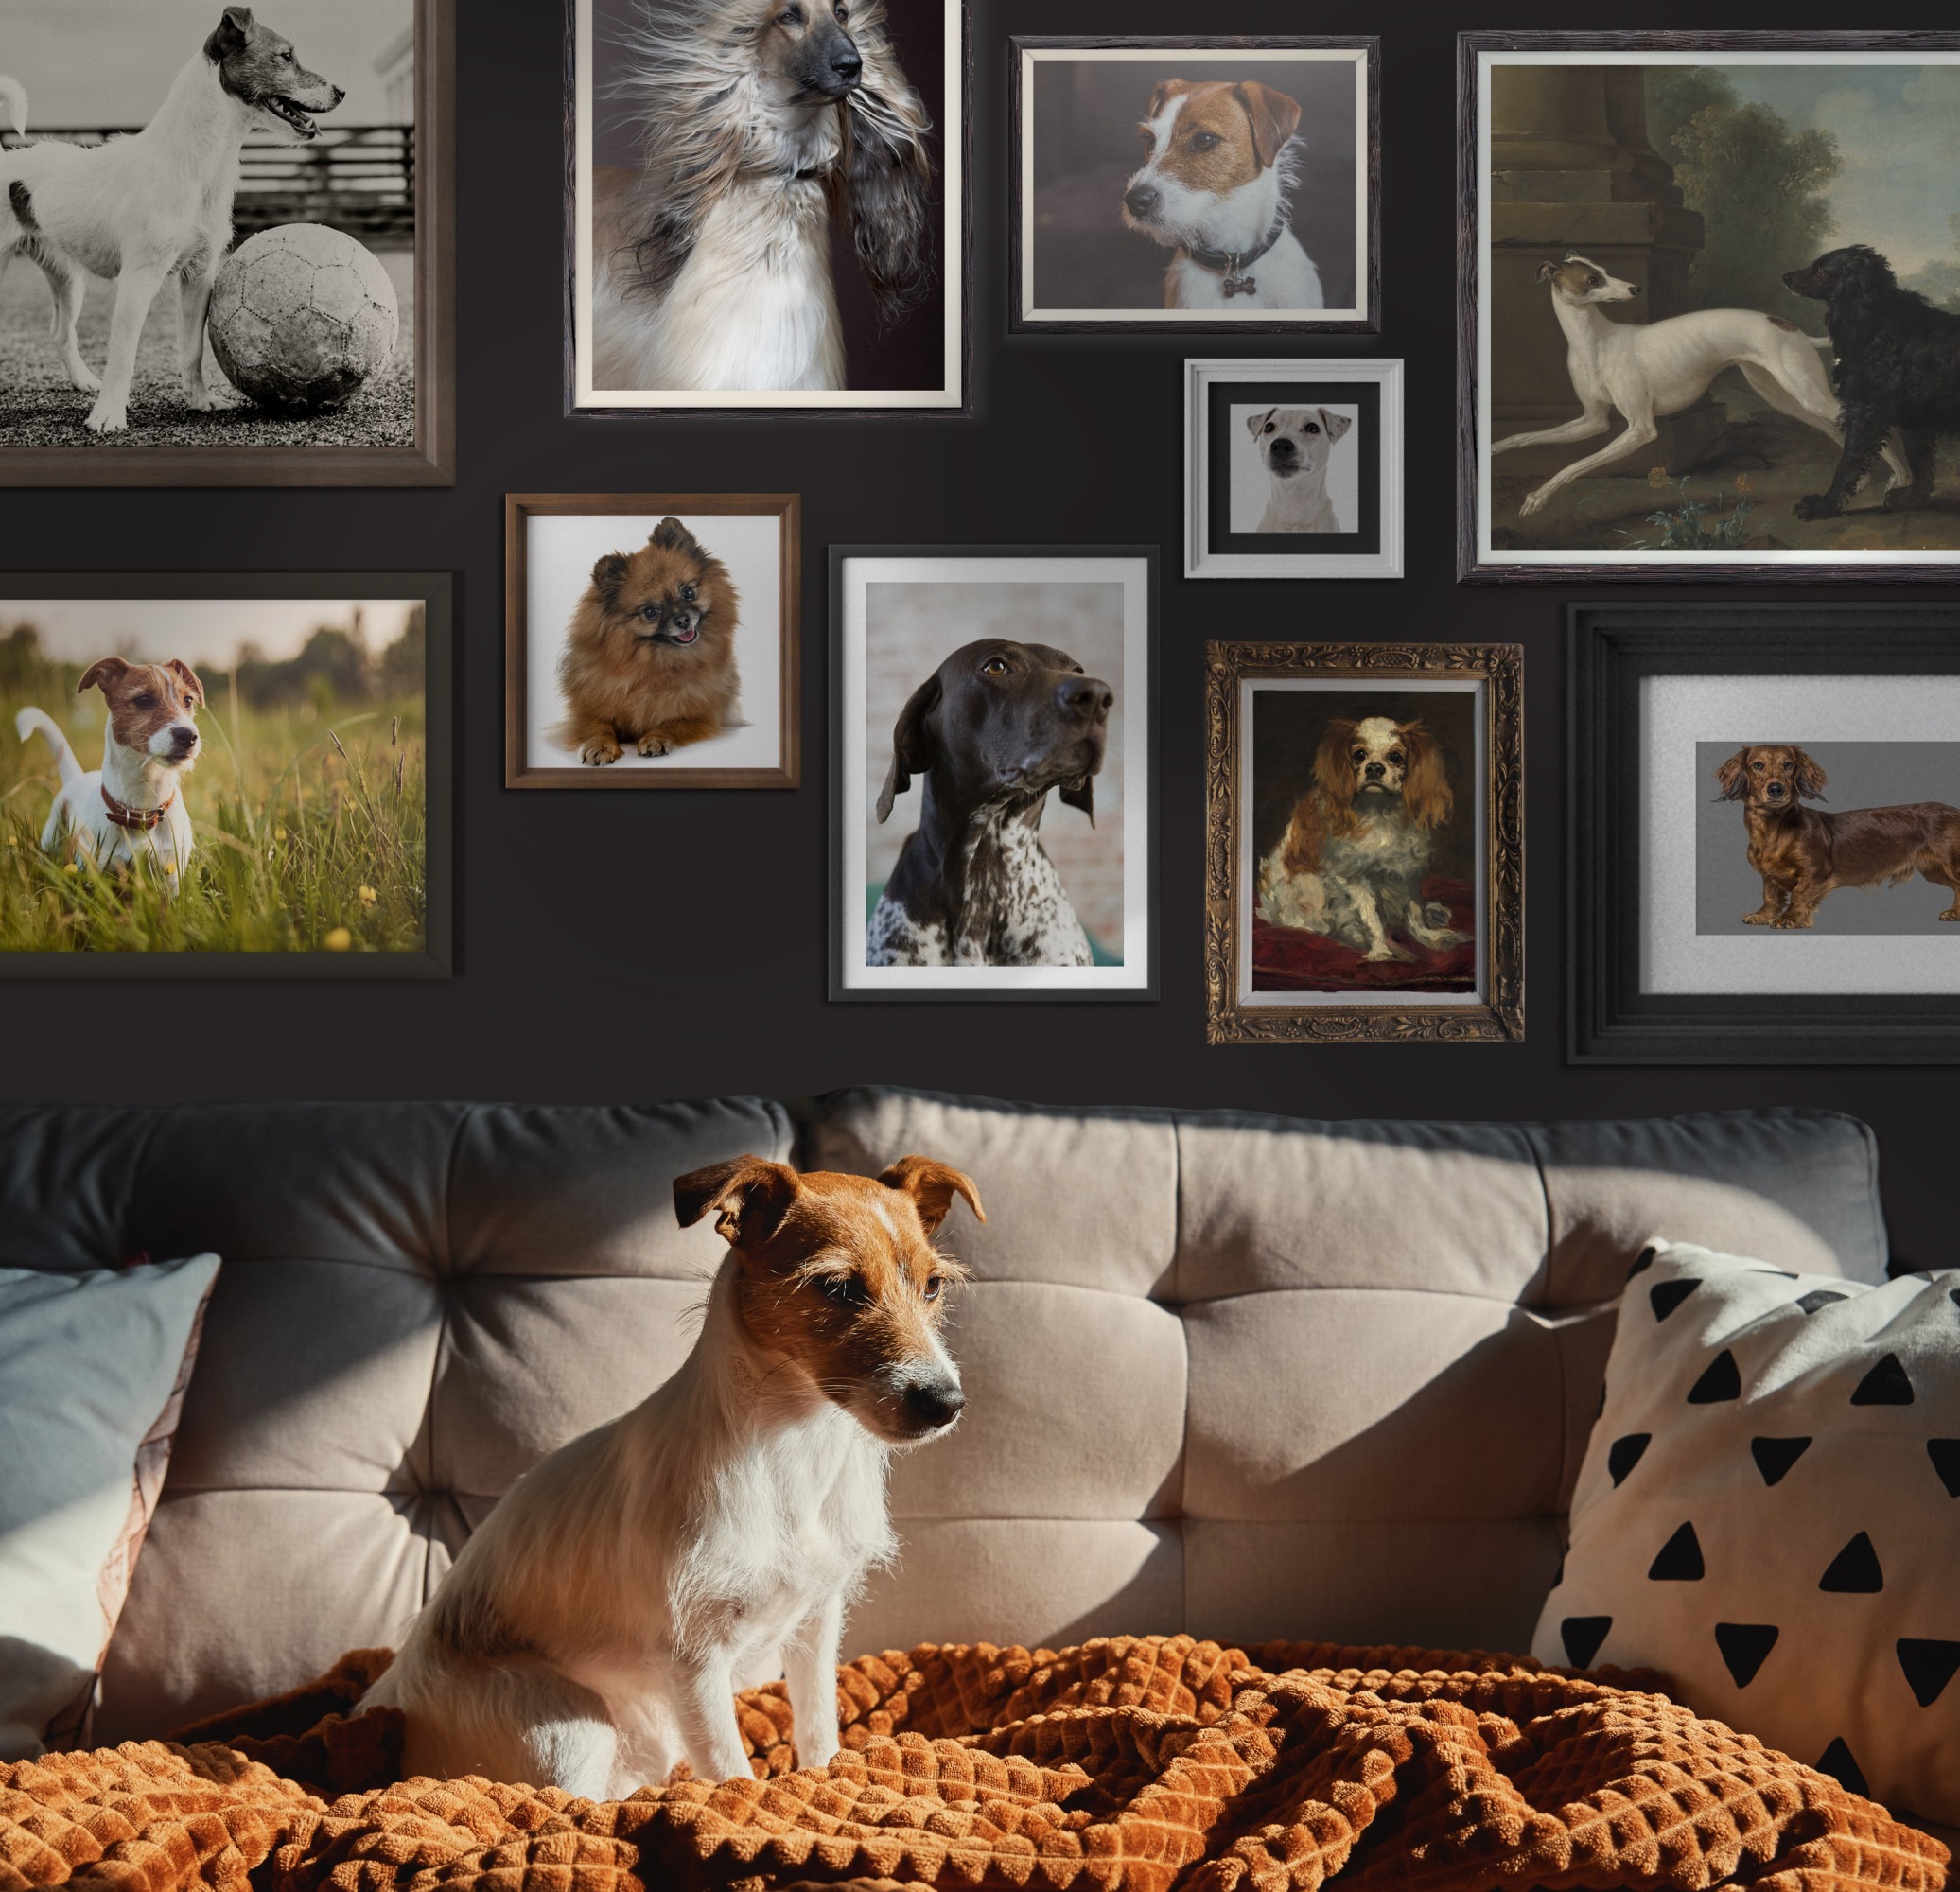 Concept photo illustration of a dog on sofa with past dogs in framed portraits behind